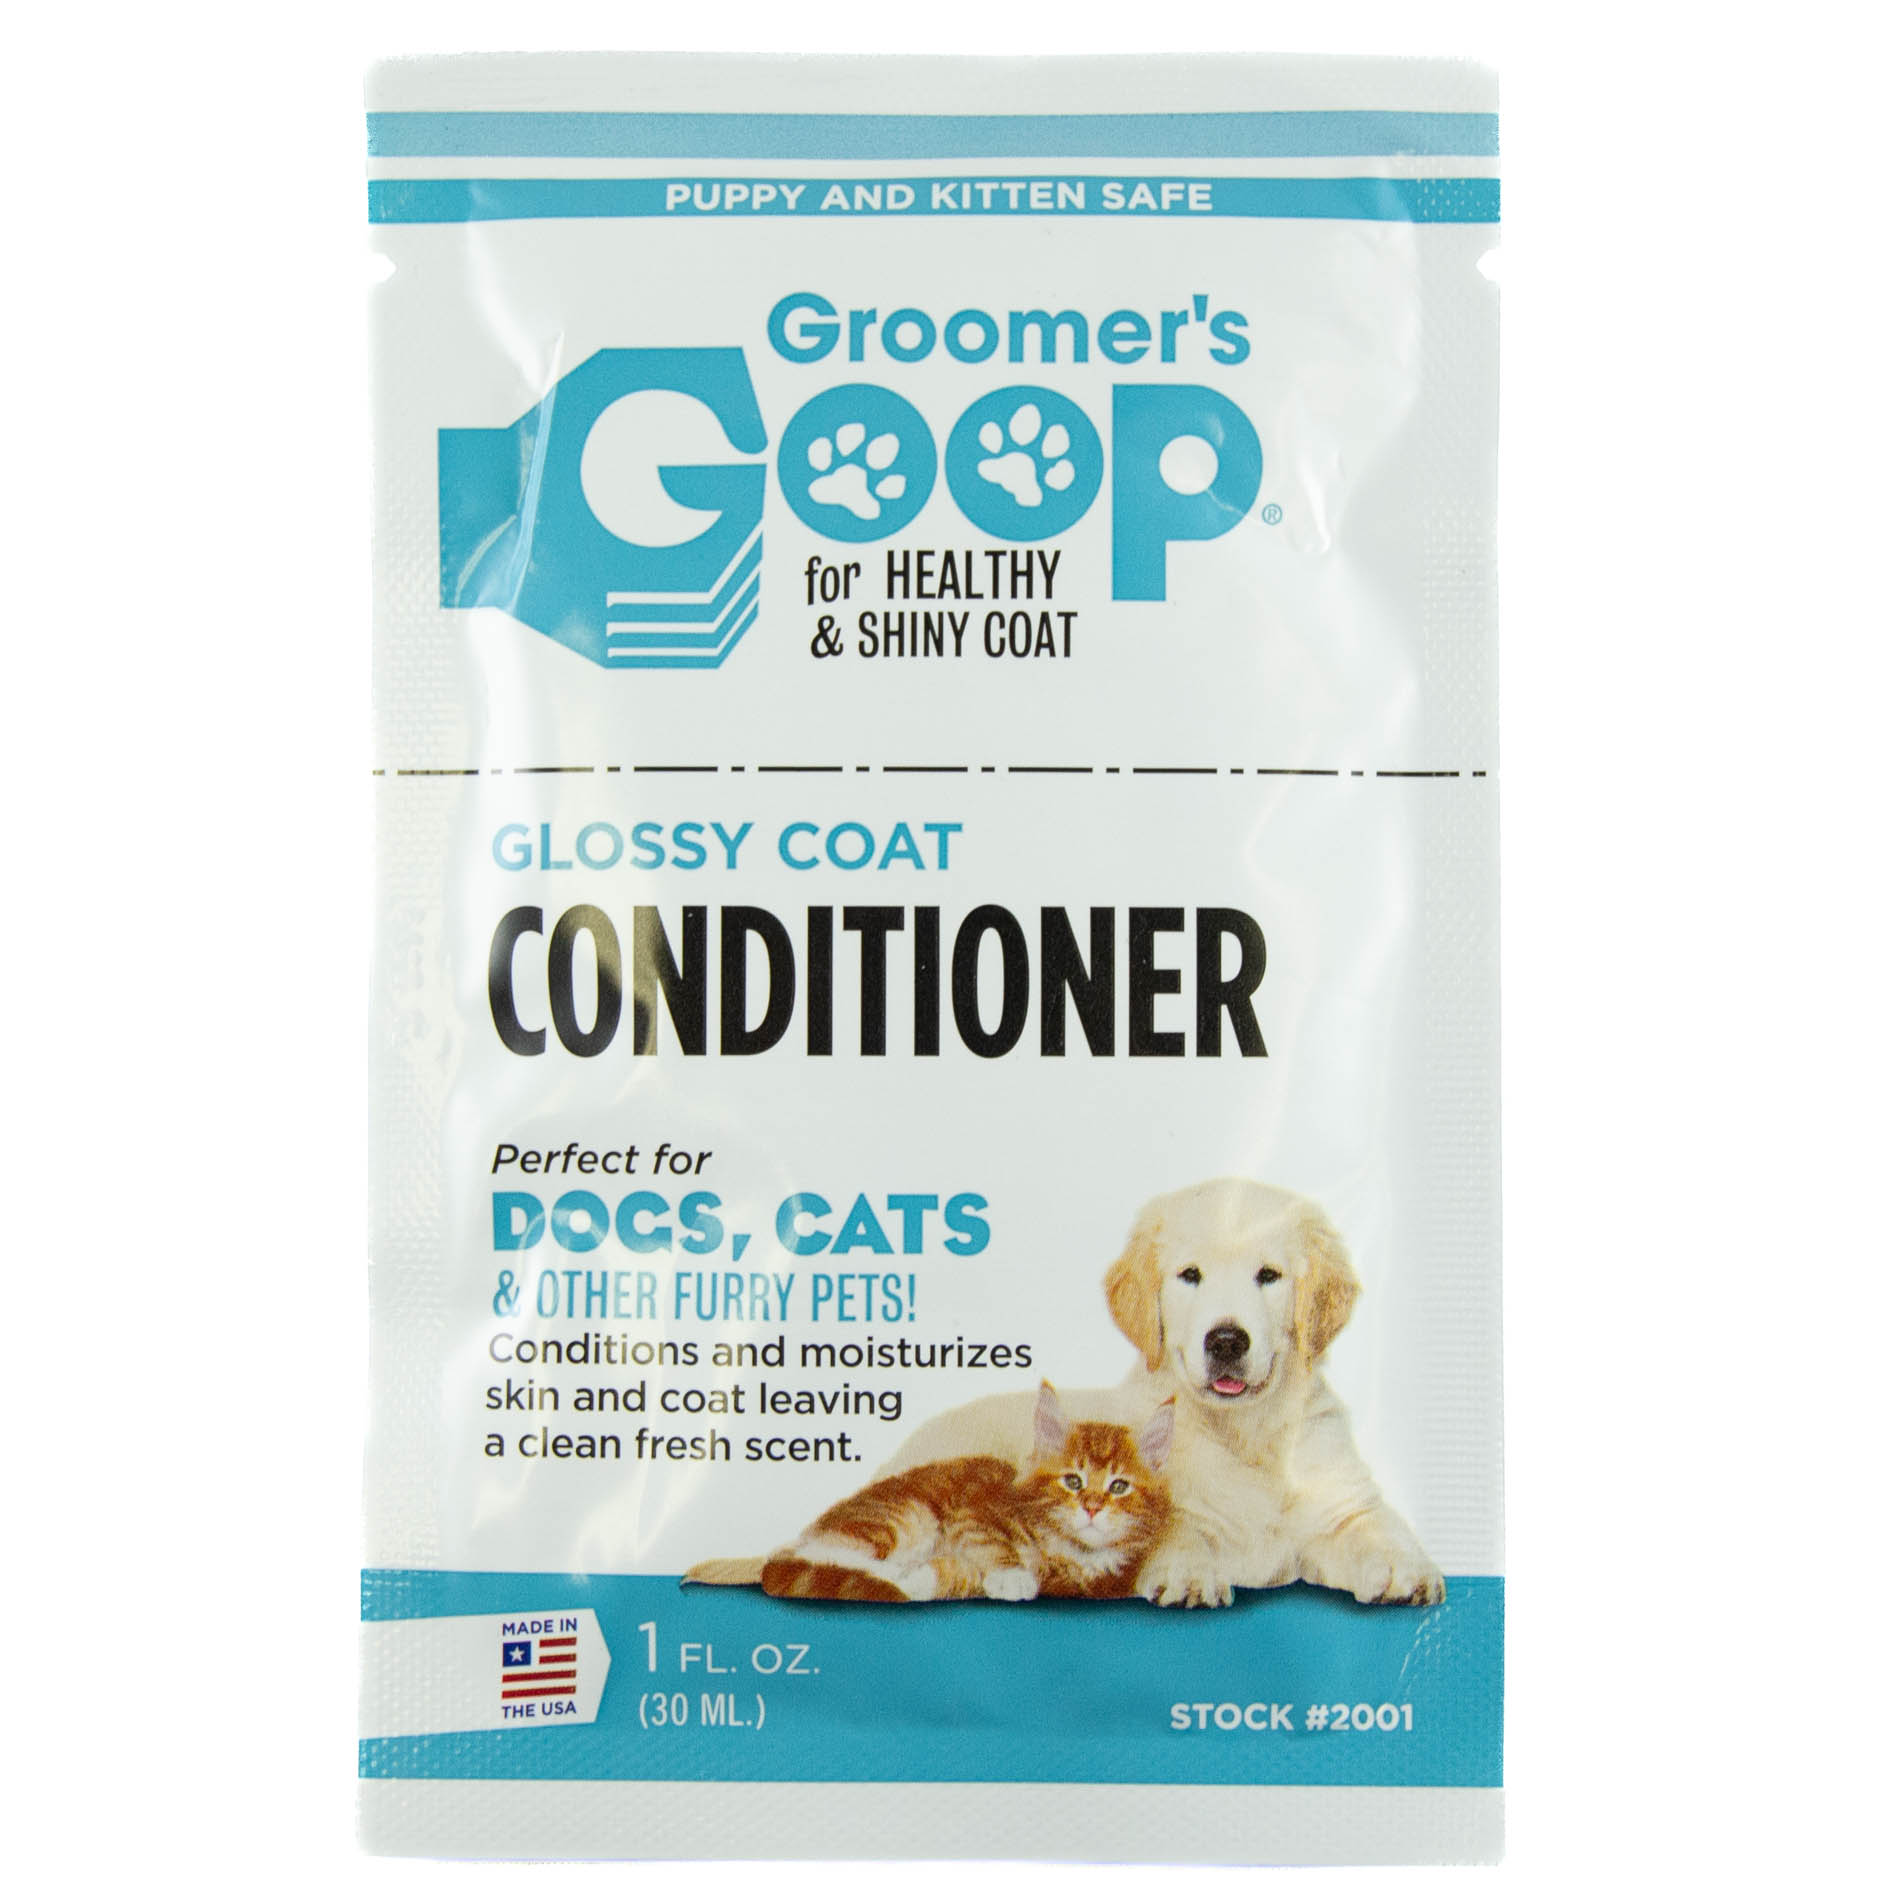 Creme Degreaser For Oily Coats 14oz by Groomer's Goop